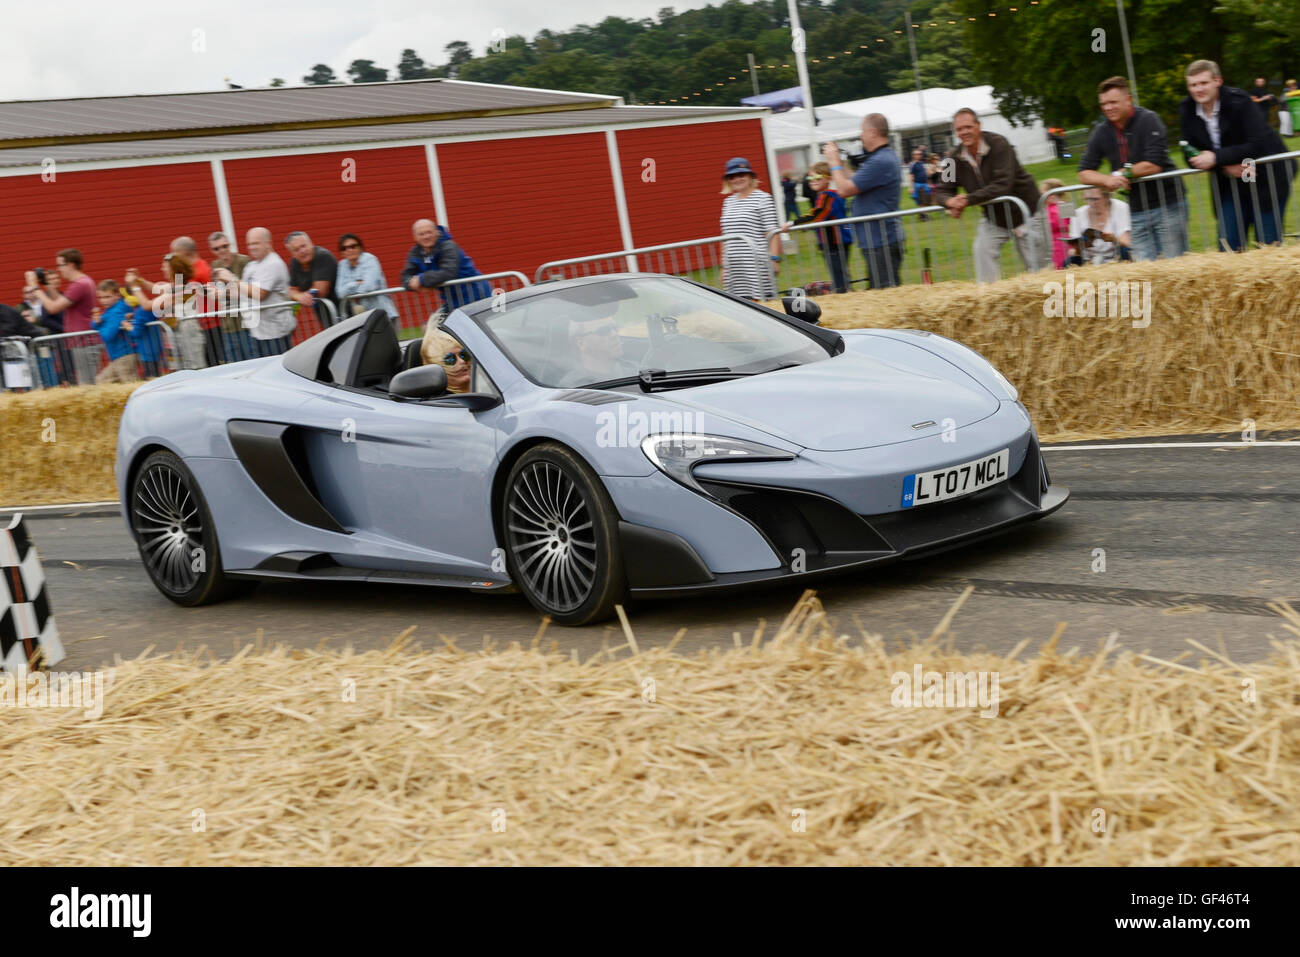 Bolesworth, Cheshire, UK. 29th July 2016. A McLaren being driven round the track. The event is the brainchild of Chris Evans and features 3 days of cars, music and entertainment with profits being donated to the charity Children in Need. Credit:  Andrew Paterson/Alamy Live News Stock Photo